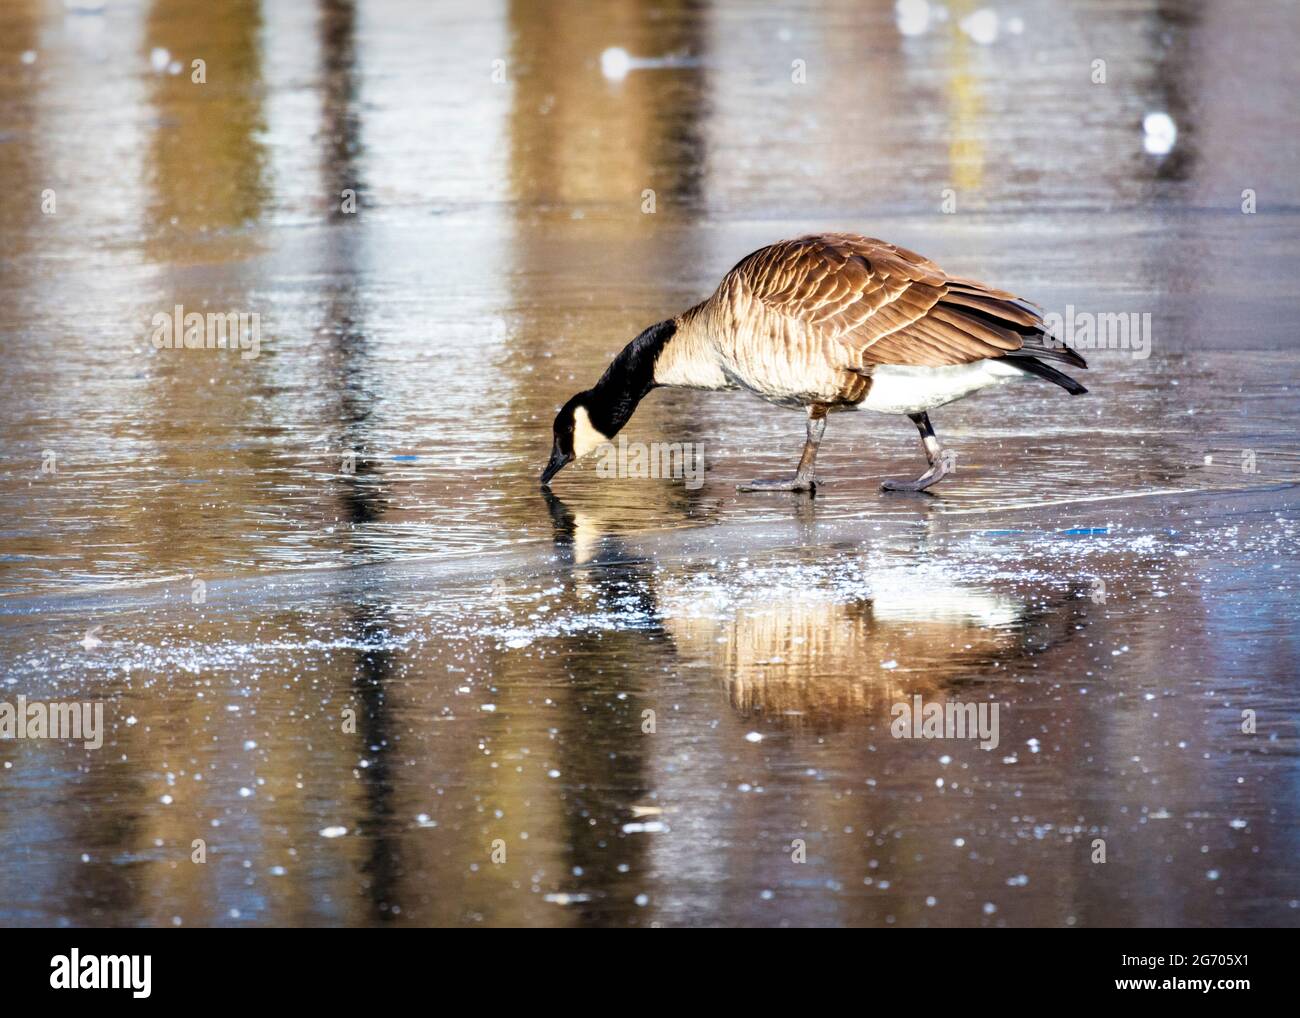 A Canada Goose makes his way across ice.  Reflection in the foreground. Stock Photo